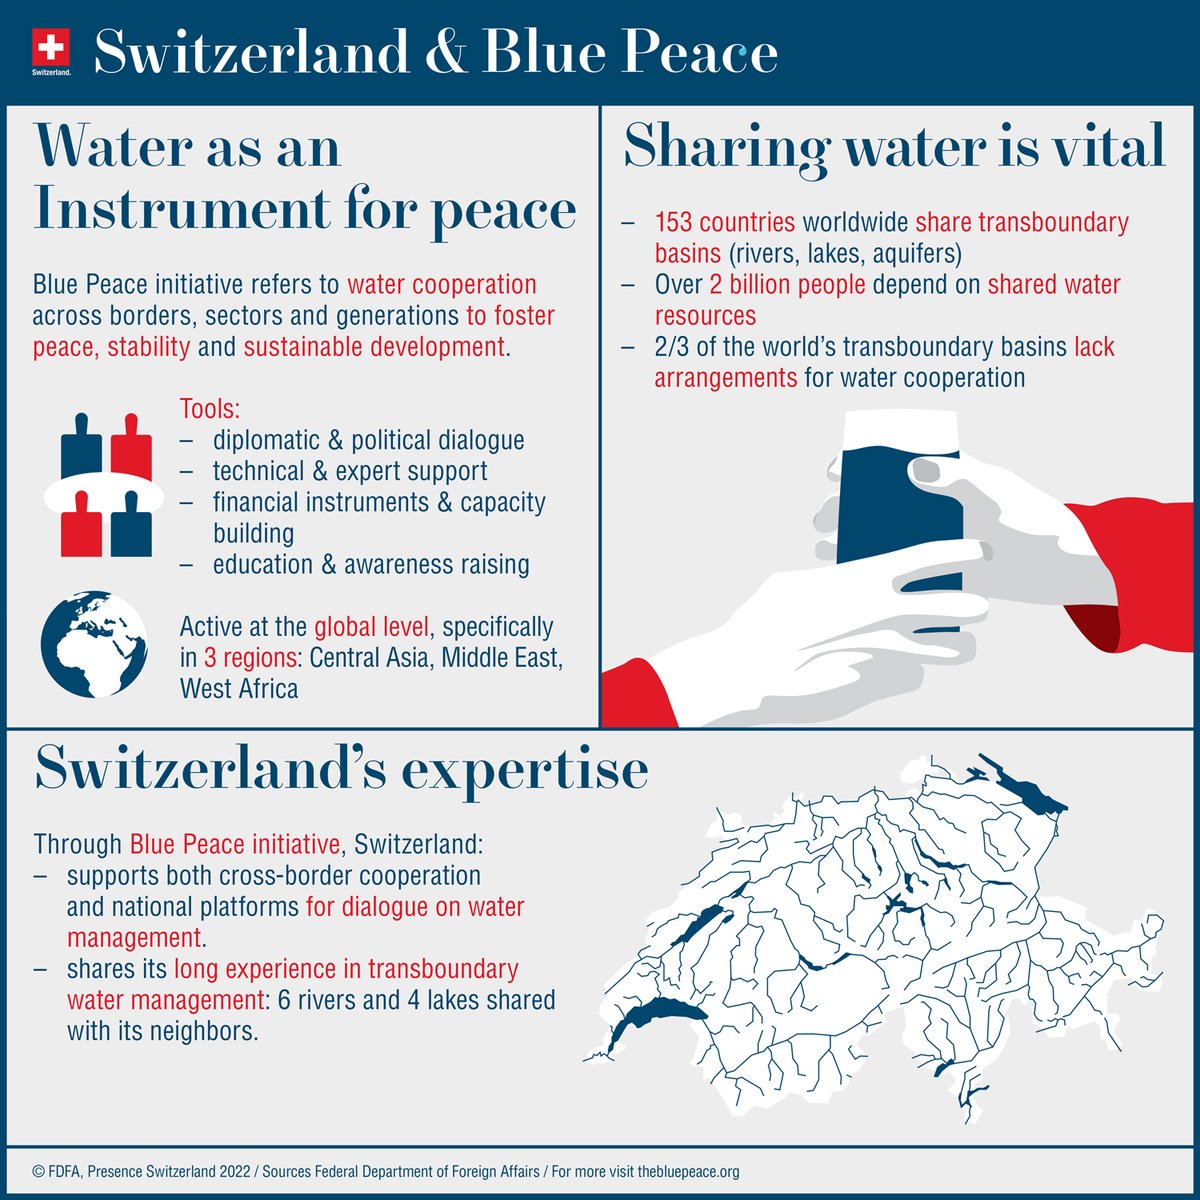 It’s #WorldWaterDay! 💧 With its long-standing experience in water management and transboundary cooperation, Switzerland keeps engaging in the global dialogue. More on 🇨🇭 Guidelines on Water 2022-2025: shorturl.at/ktN17